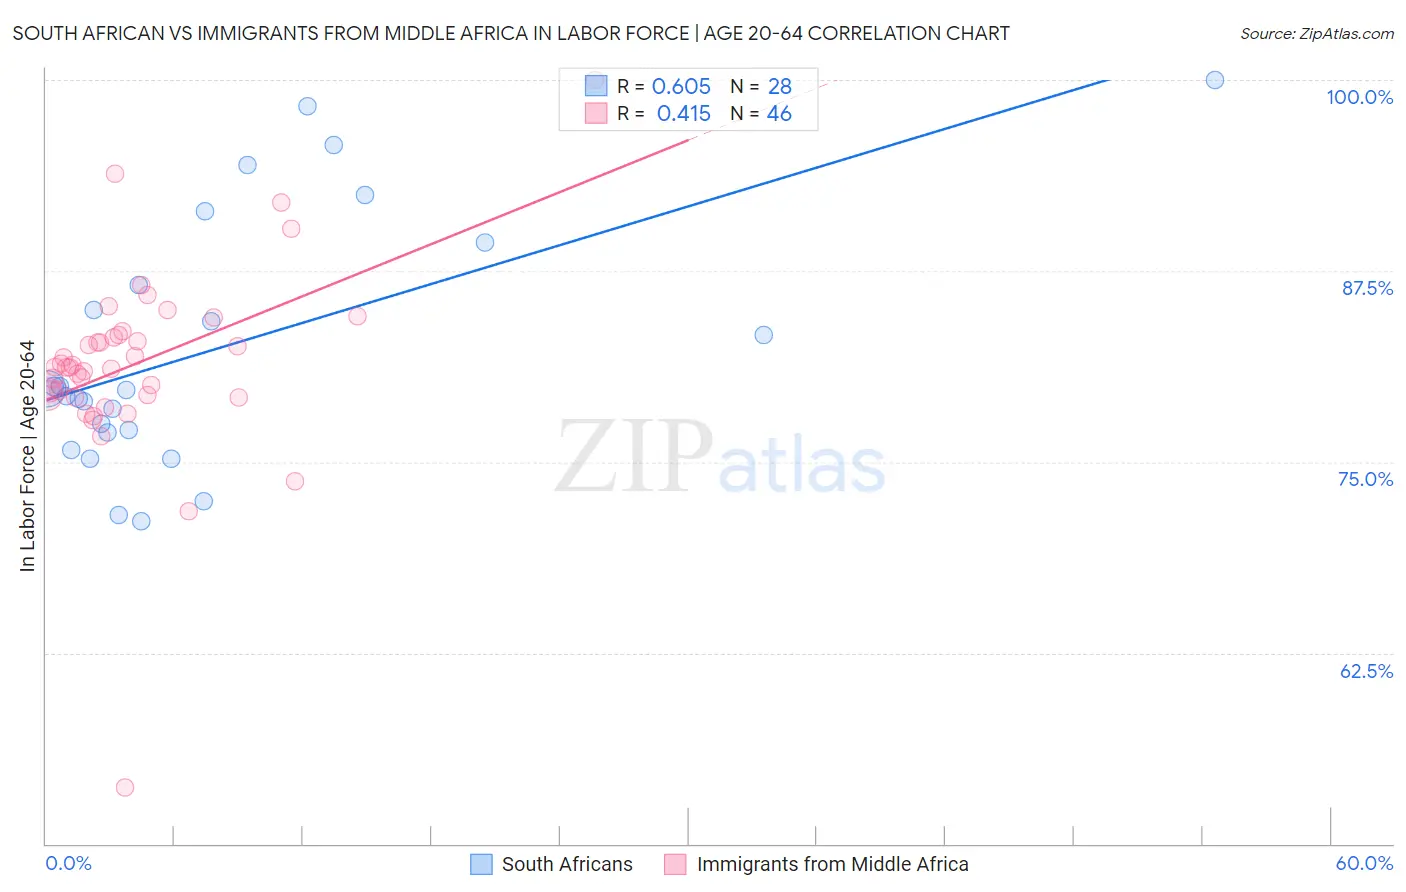 South African vs Immigrants from Middle Africa In Labor Force | Age 20-64